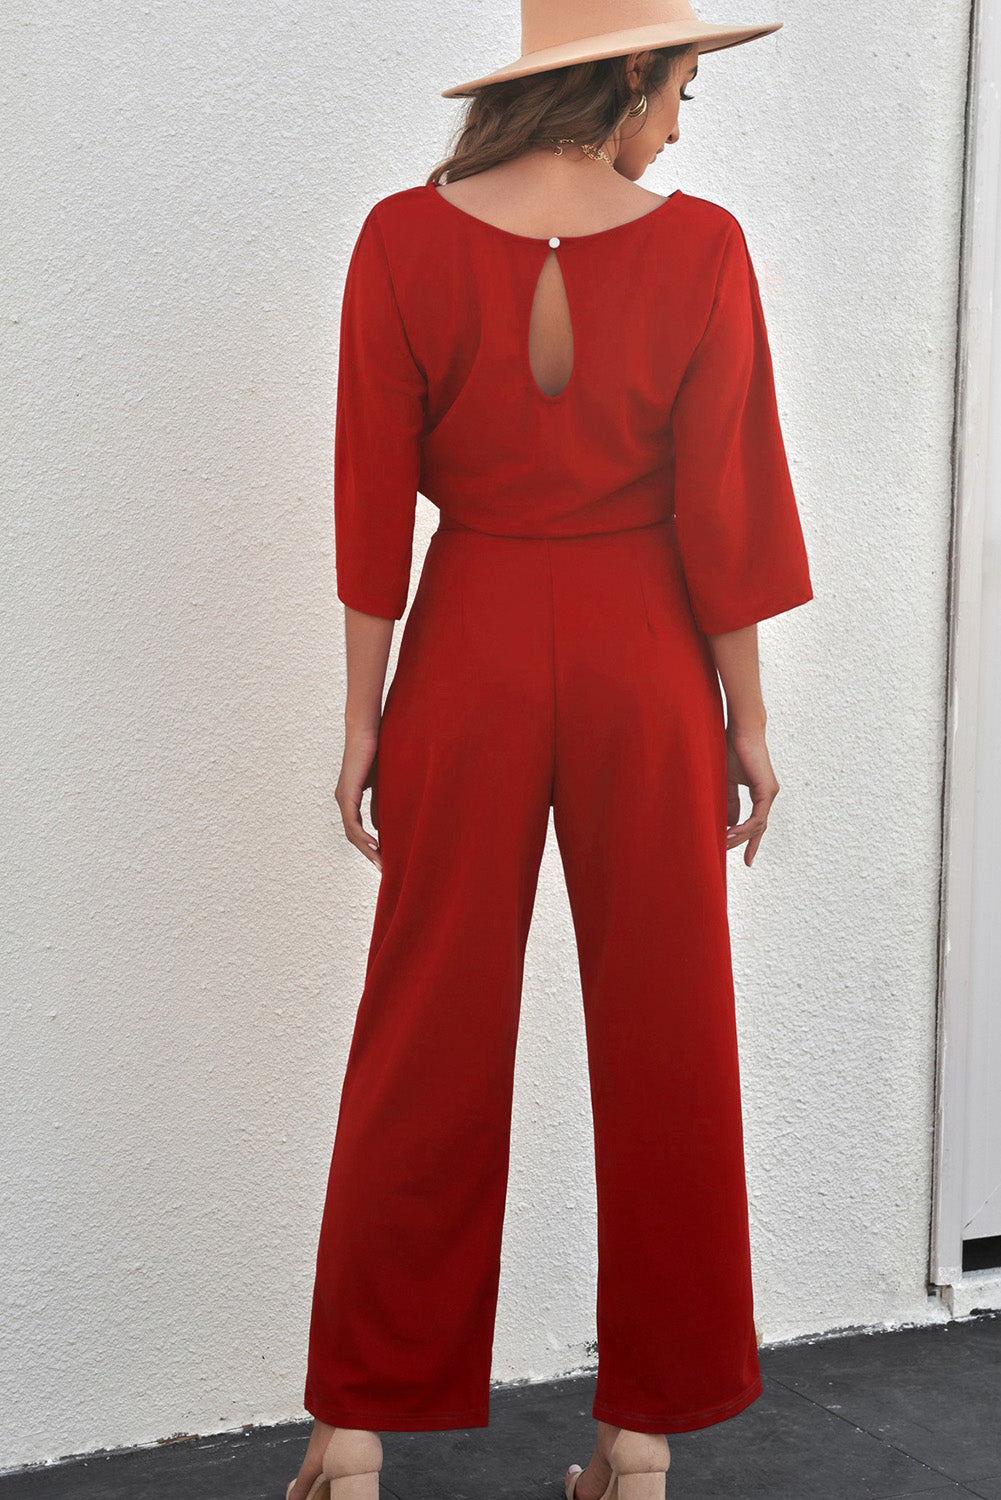 Shop Our Belted Three-Quarter Sleeve Jumpsuit | Chic And Stylish